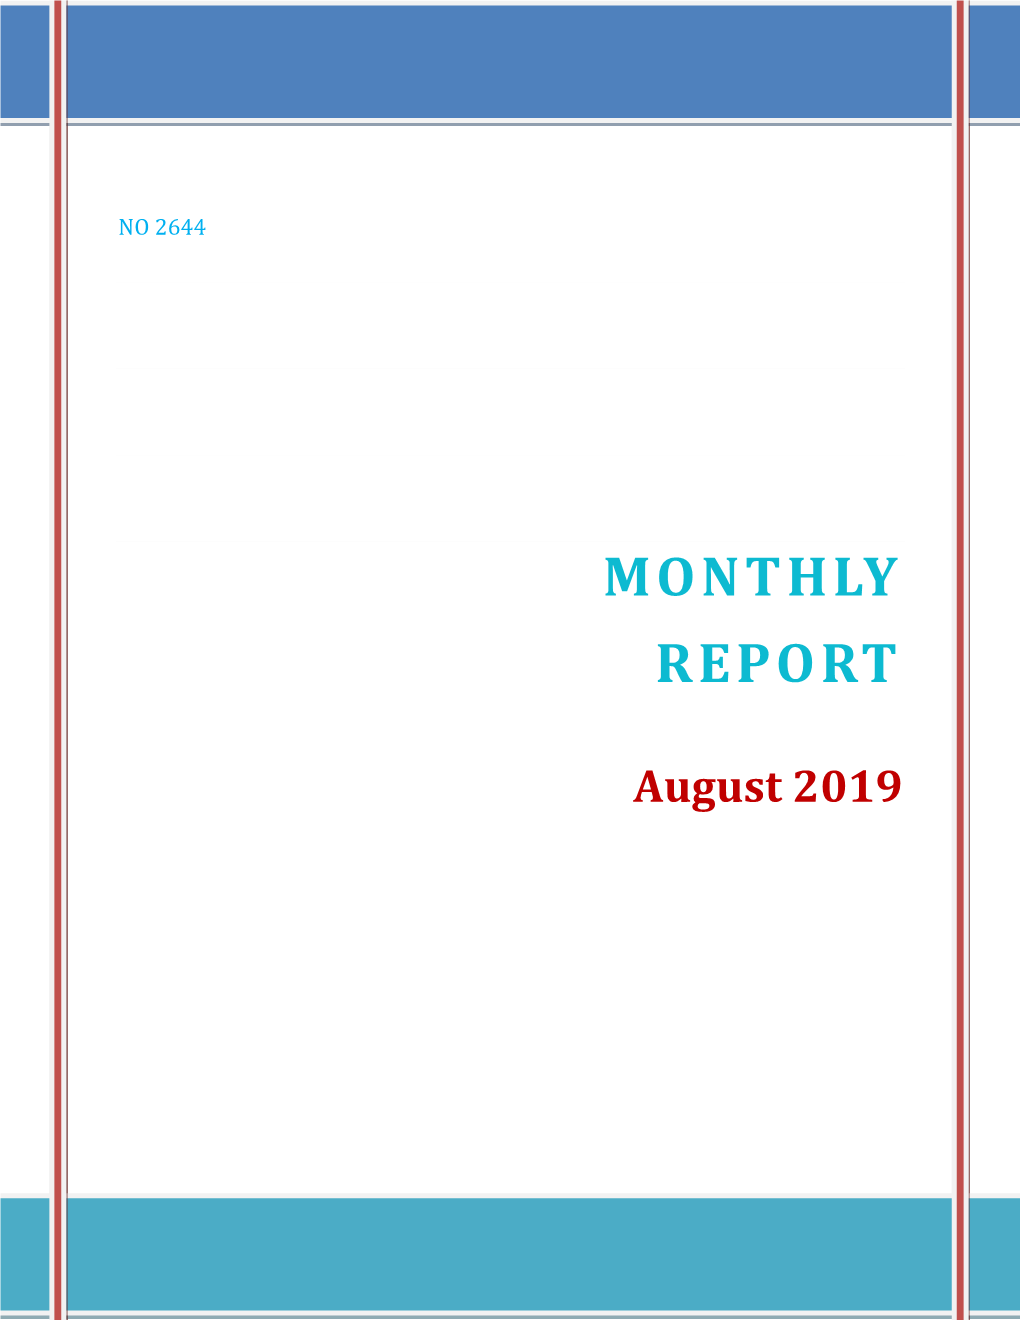 Monthly Report of Vodacom August 2019